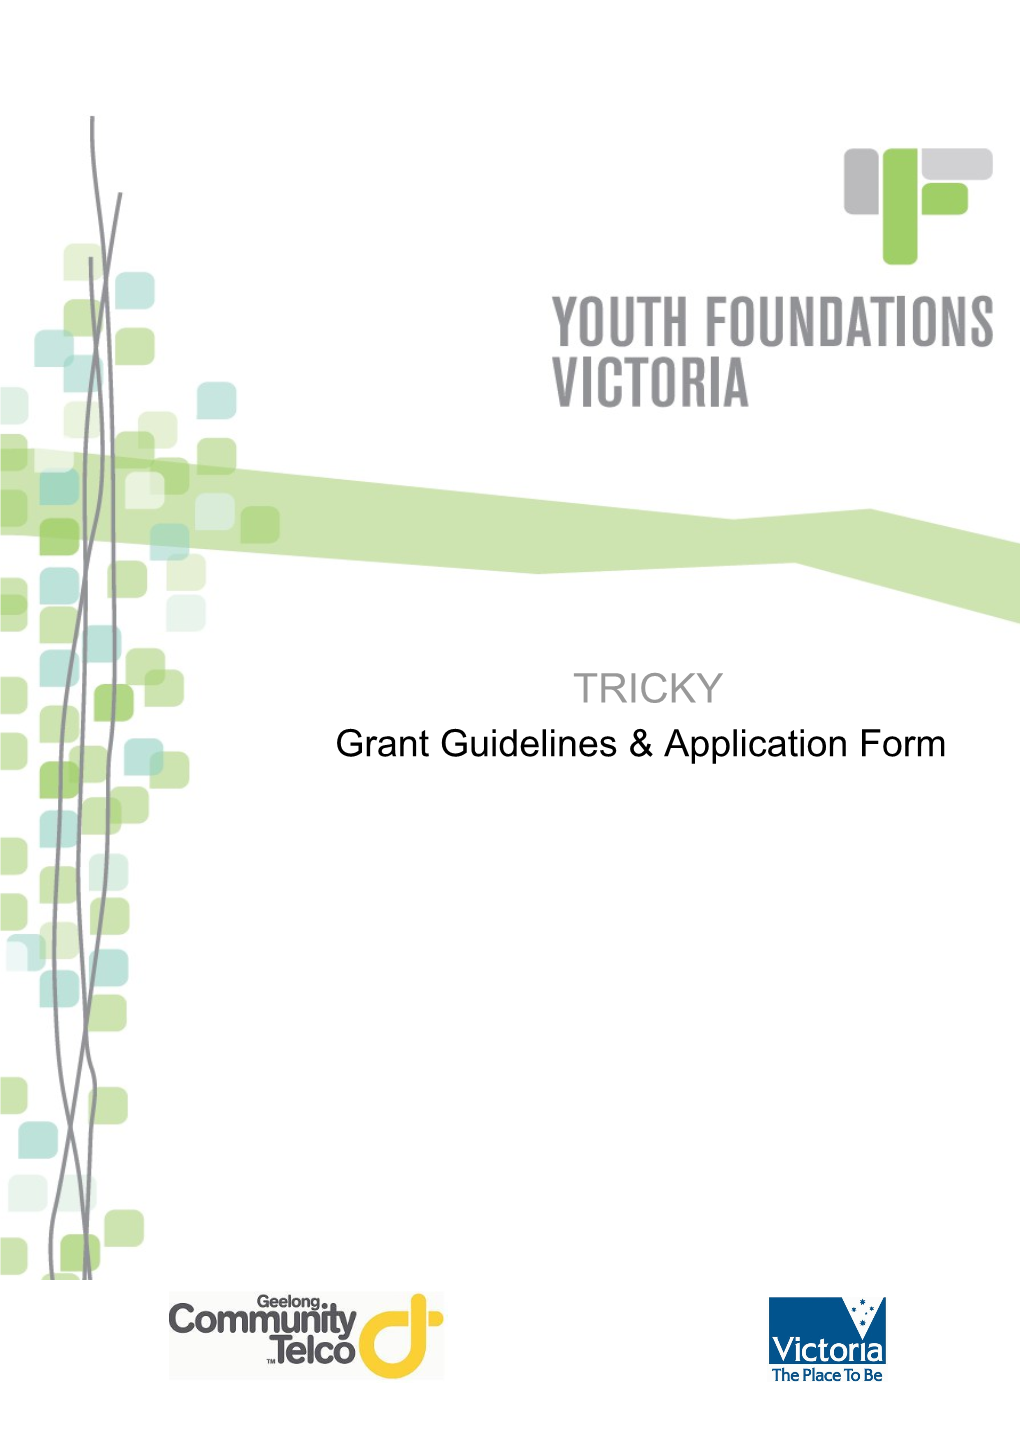 Youth Foundations Victoria